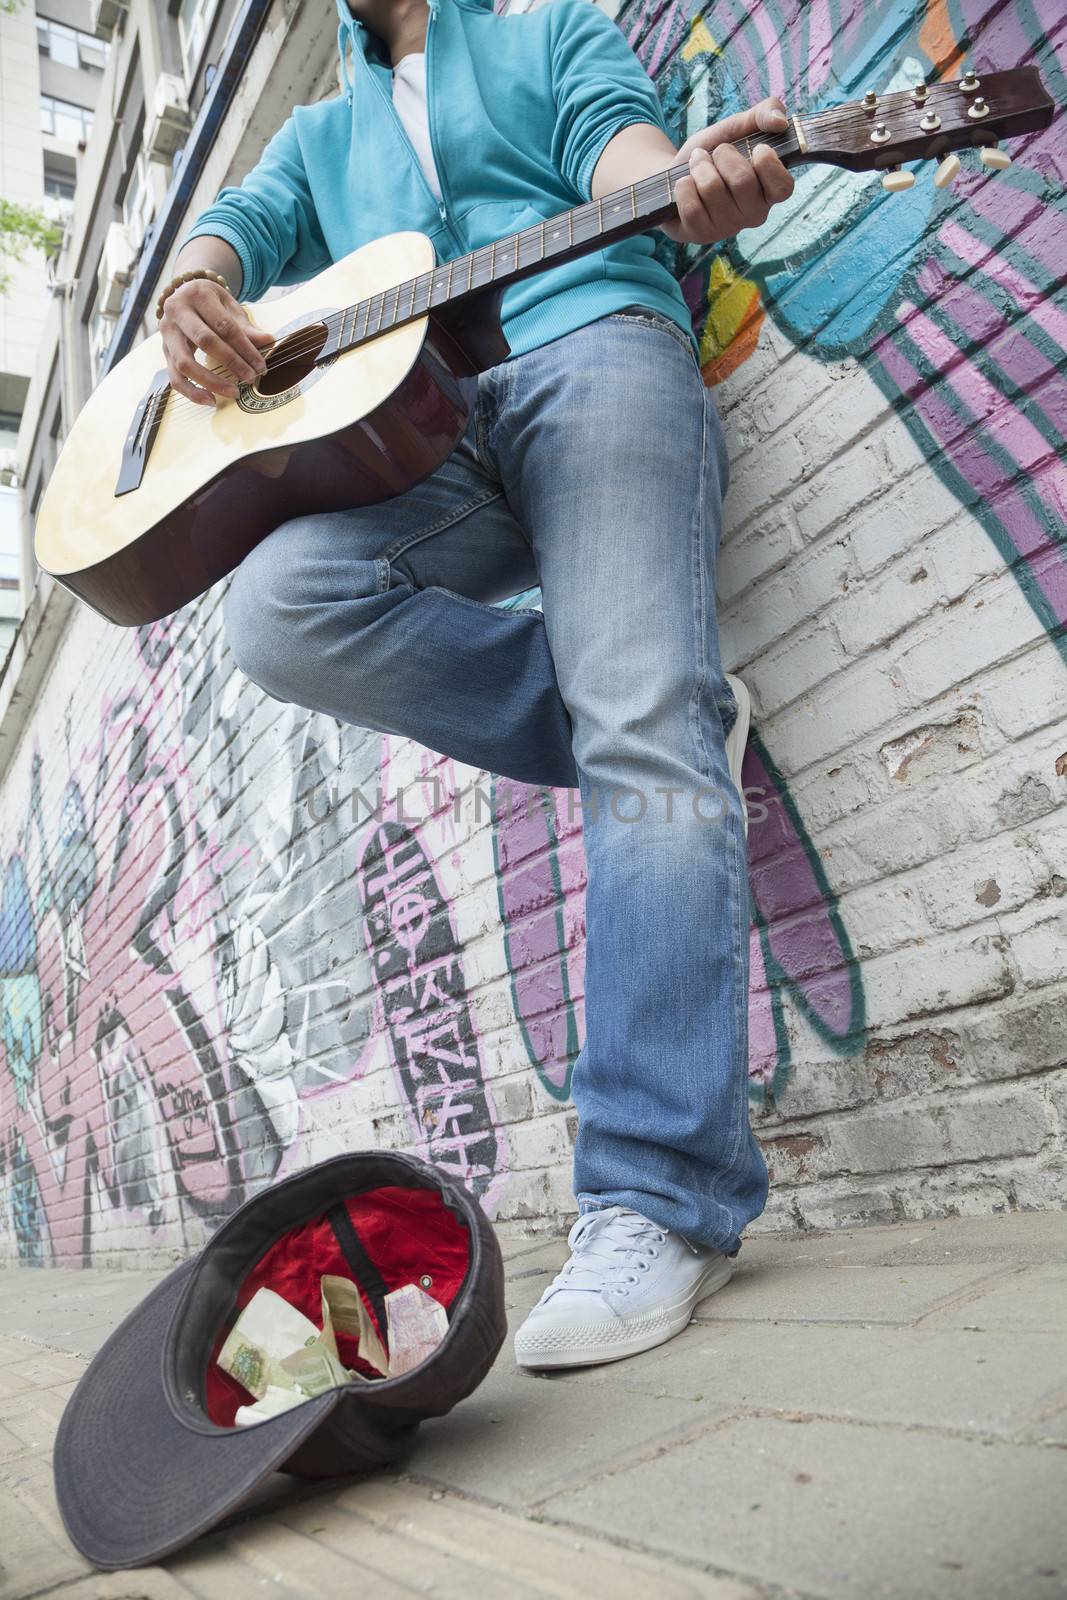 Young street musician playing guitar and busking for money in front of a wall with graffiti by XiXinXing